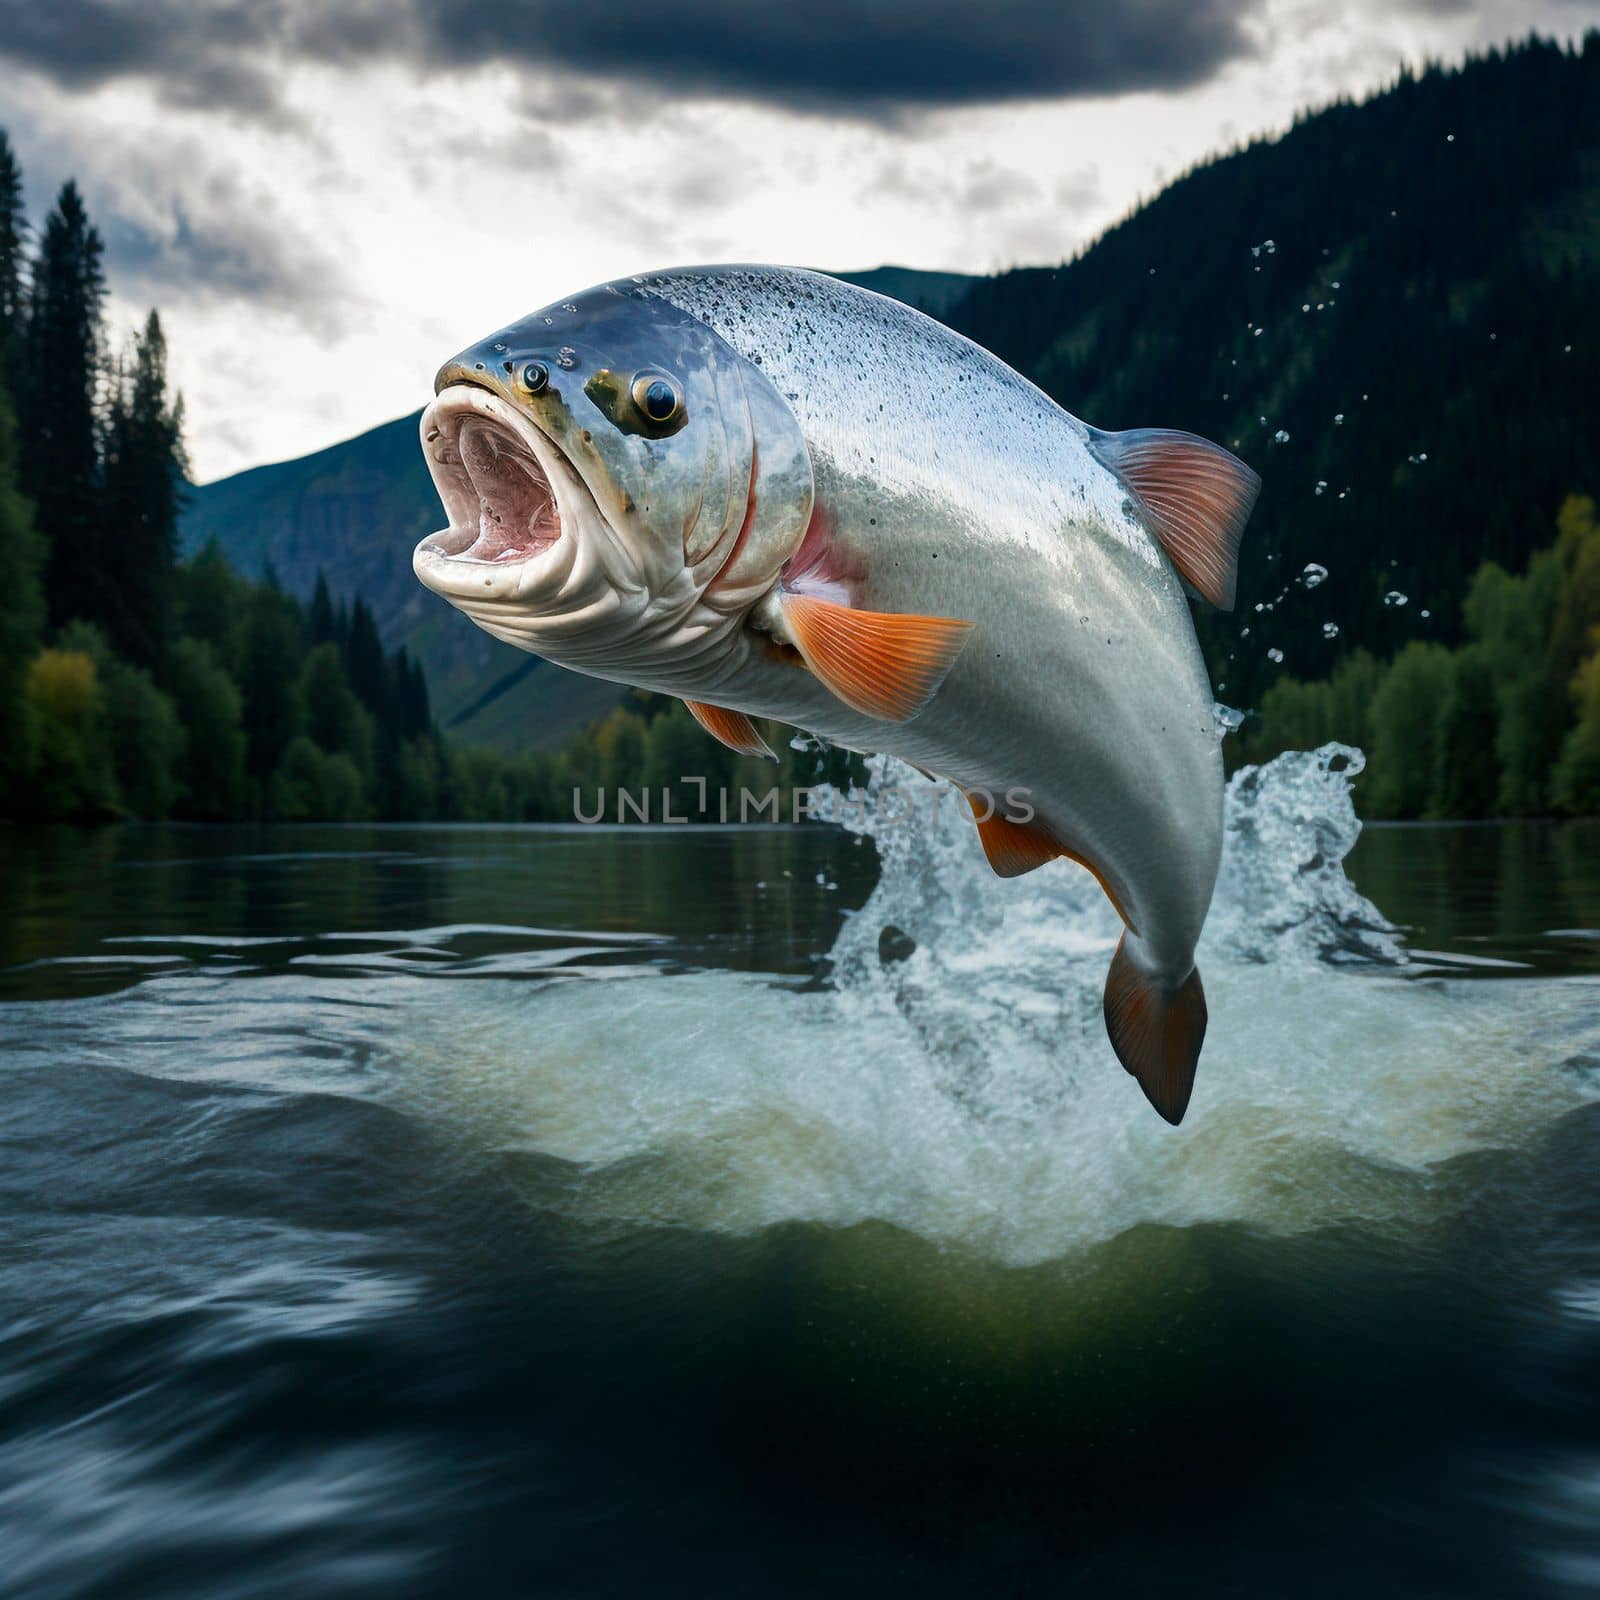 Fish jumping out of the water by NeuroSky